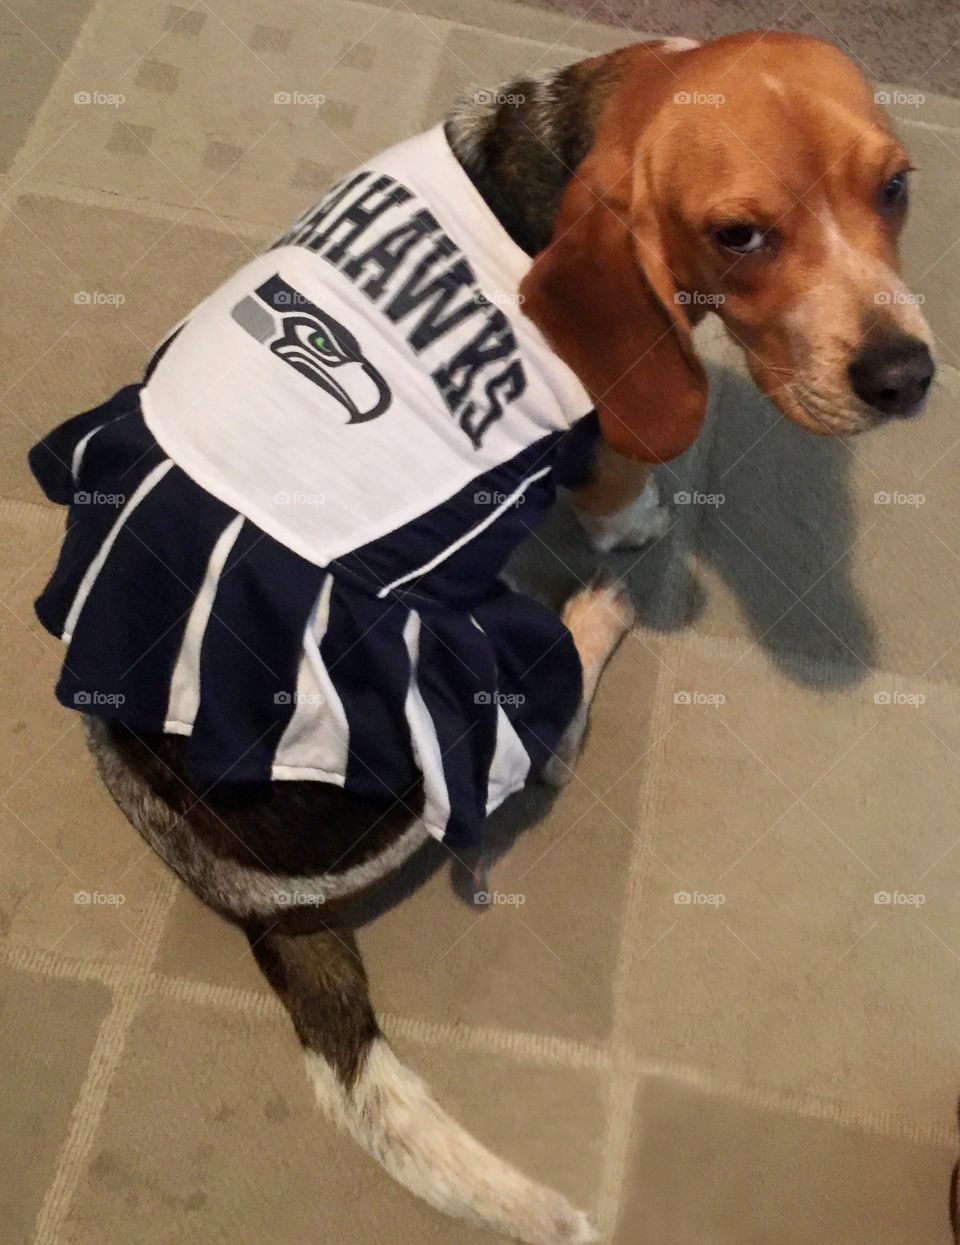 Ginger wearing her Seahawks cheerleading outfit 